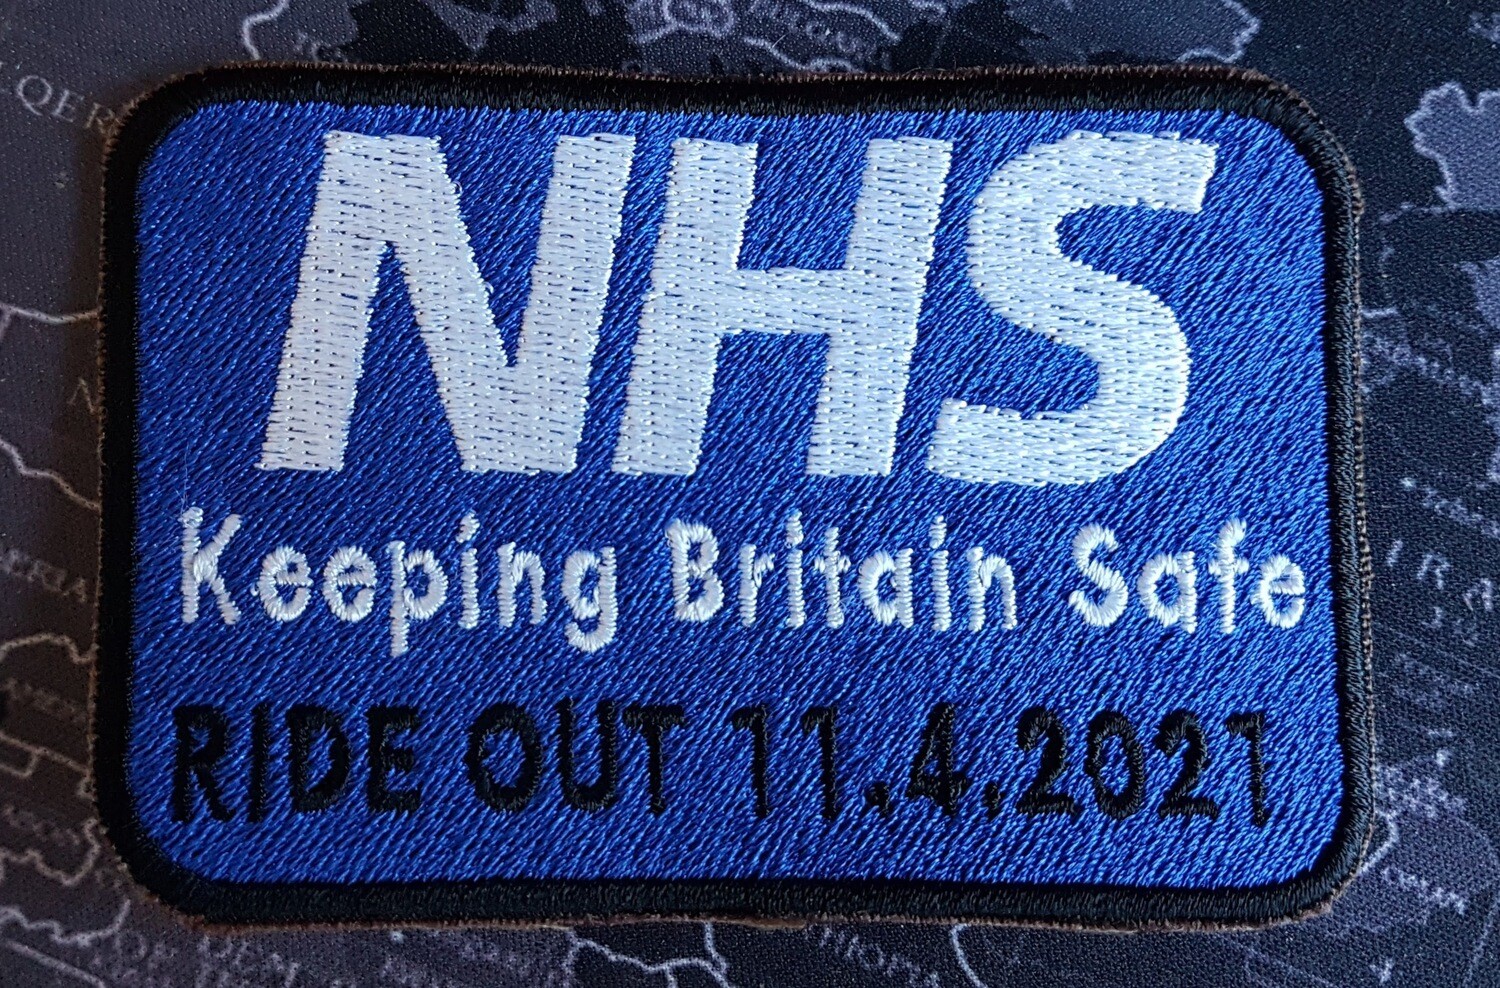 The NHS 'Keeping Britain Safe' Ride Out 11/04/2021 Co-Vid19 Commemorative Patch Fundraising